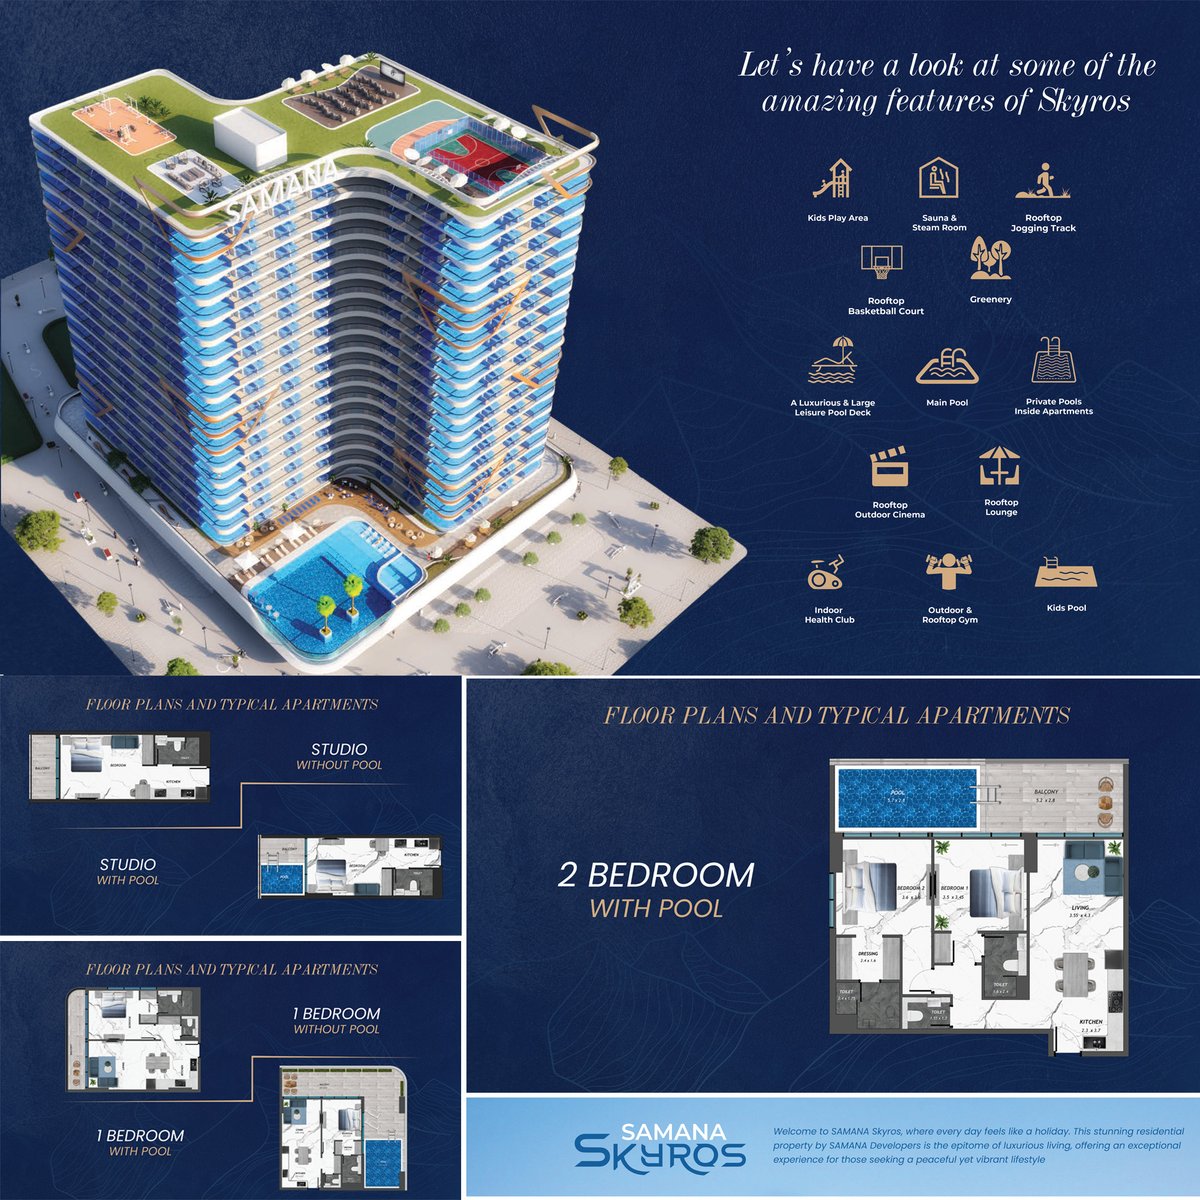 Samana Skyros

Studio, 1 Bedroom and 2 Bedroom Floor Plan

Want to know more about this property?
Contact:: 050 500 9109
Trahkeesi:0975802391

#dubairealstate #investment #dubai #DXB #mydubai #realtor #realstatebroker  
#samana
#samanaskyros
#sykros
#greece
#essenceofgreece